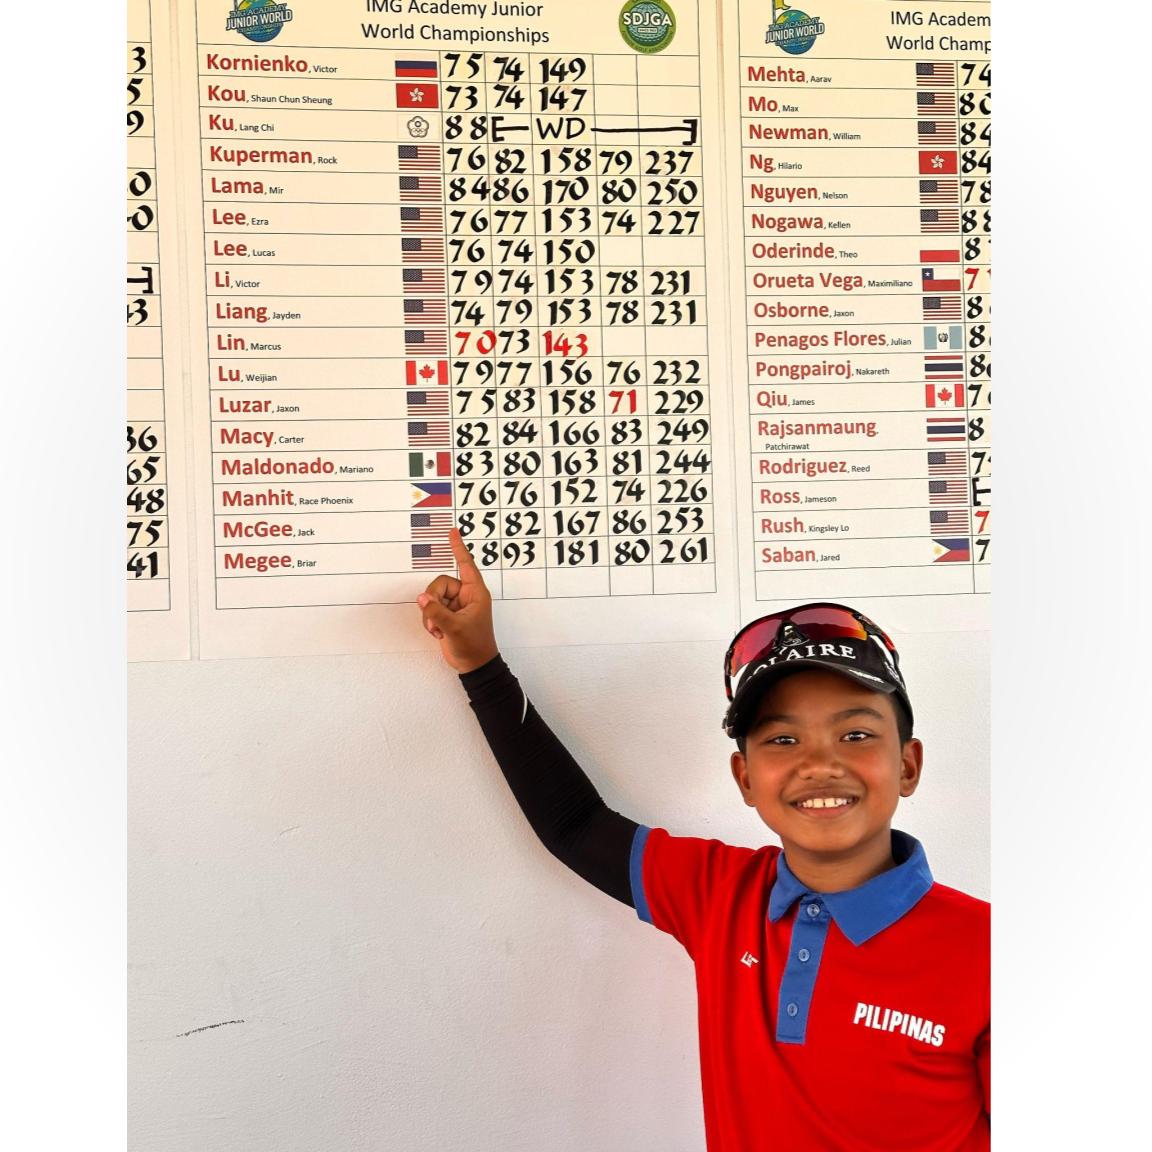 Race Manhit’s 2023 ranking at the IMG Junior World Golf Championships improved on his 2022 standing by more than 40 places.  